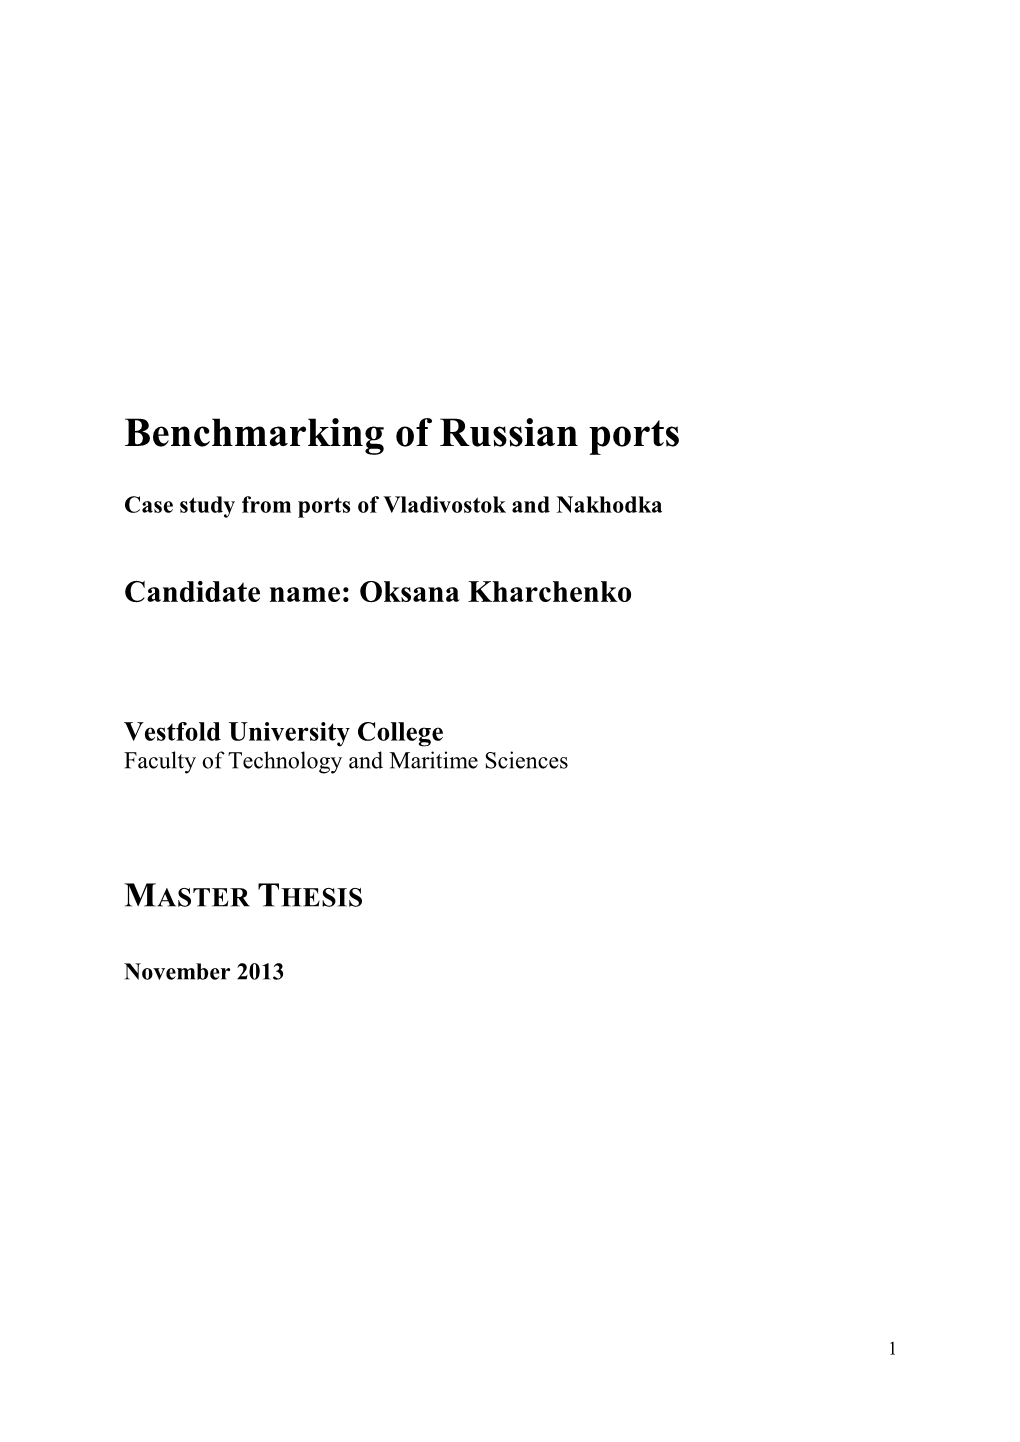 Benchmarking of Russian Ports